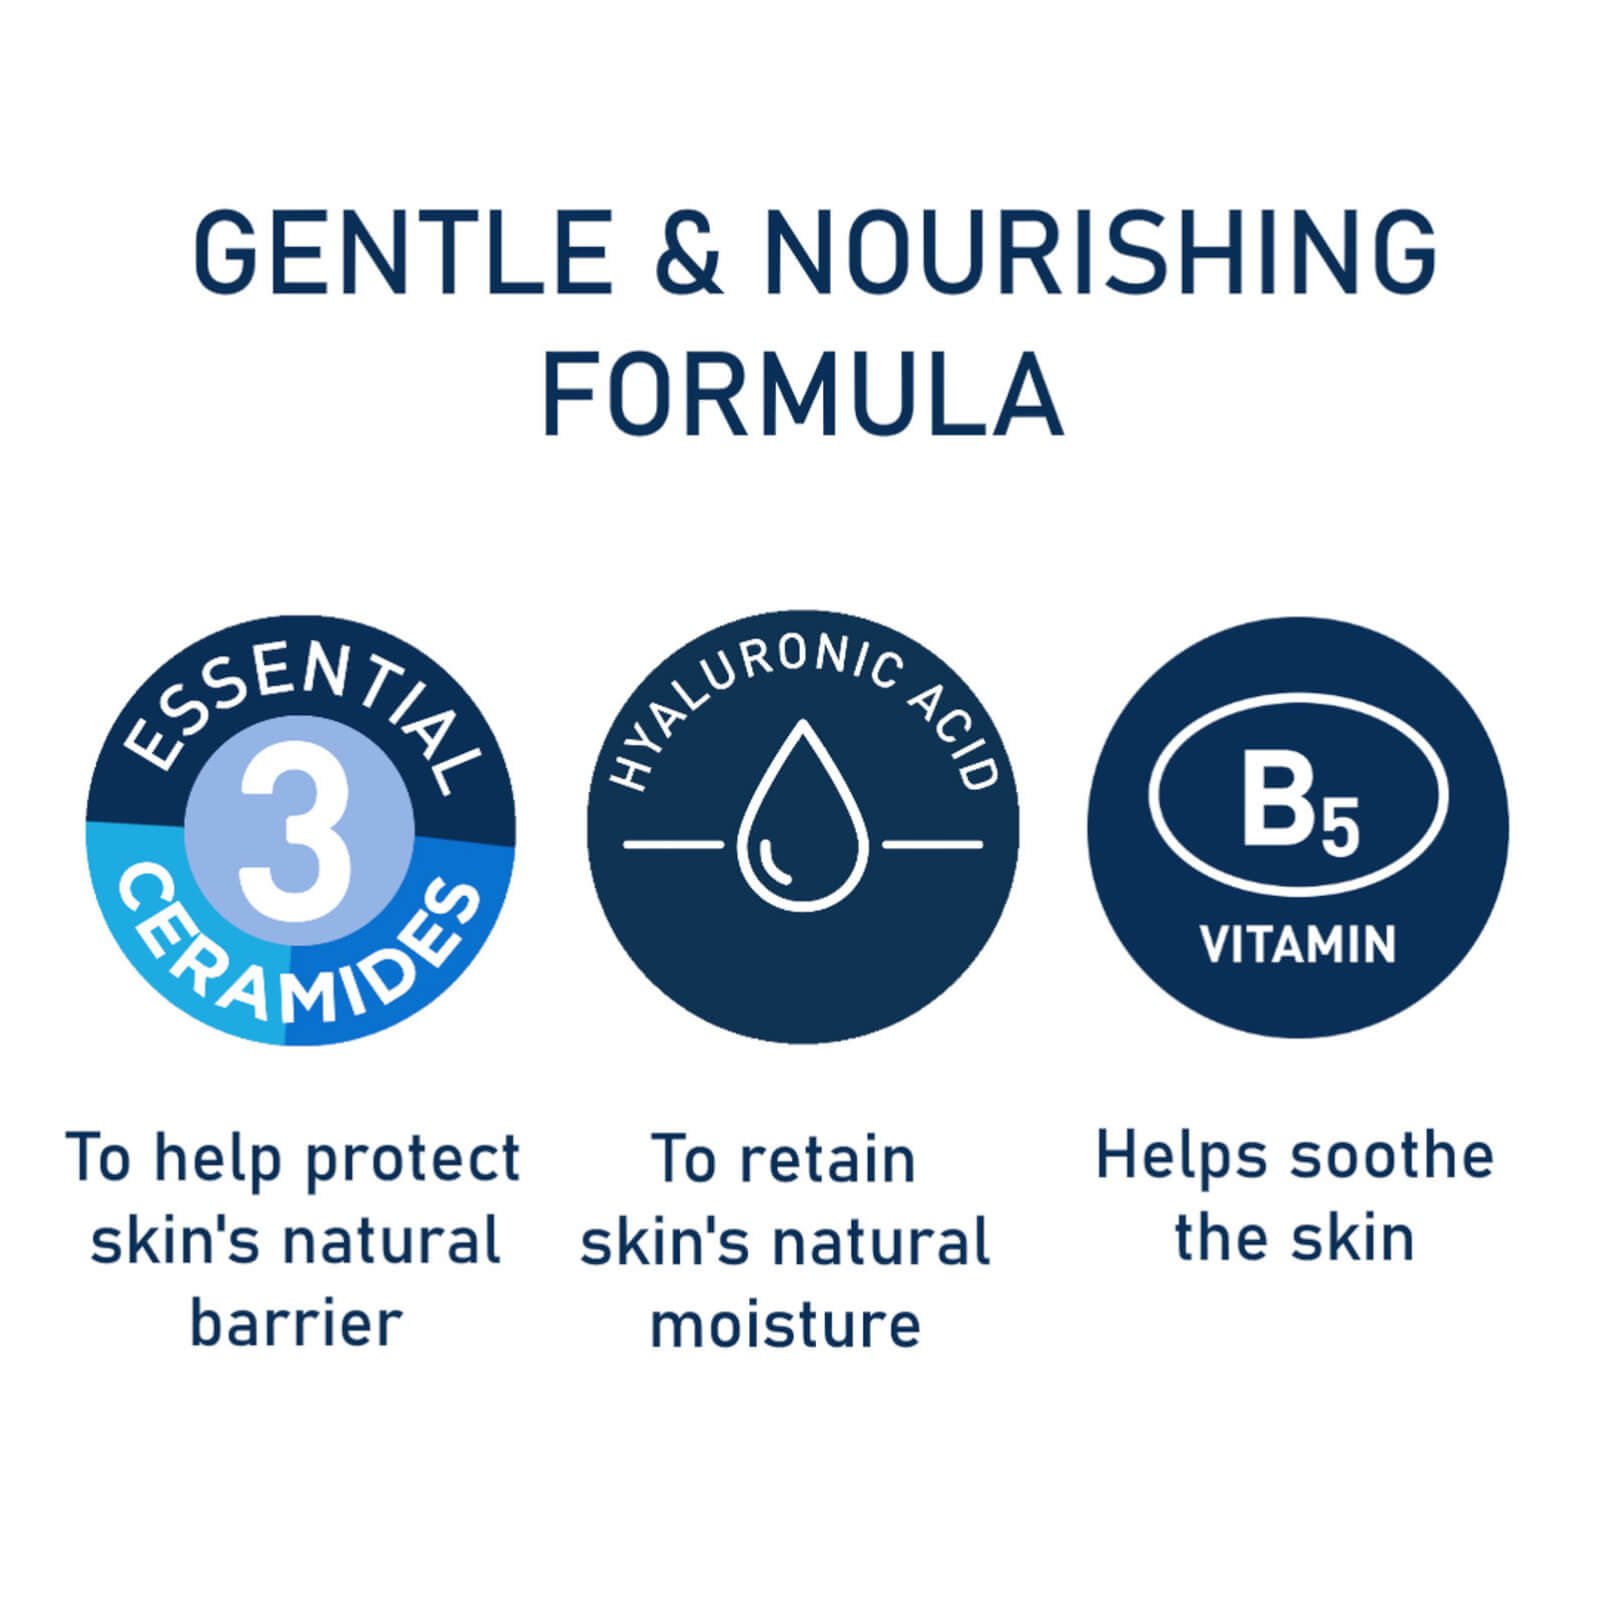 Image 1- gentle and nourishing formula, 3 essential ceramides to help protect skin's natural barrier, hyaluronic acid to retain skin's natural moisture, B5 vitamin helps soothe the skin